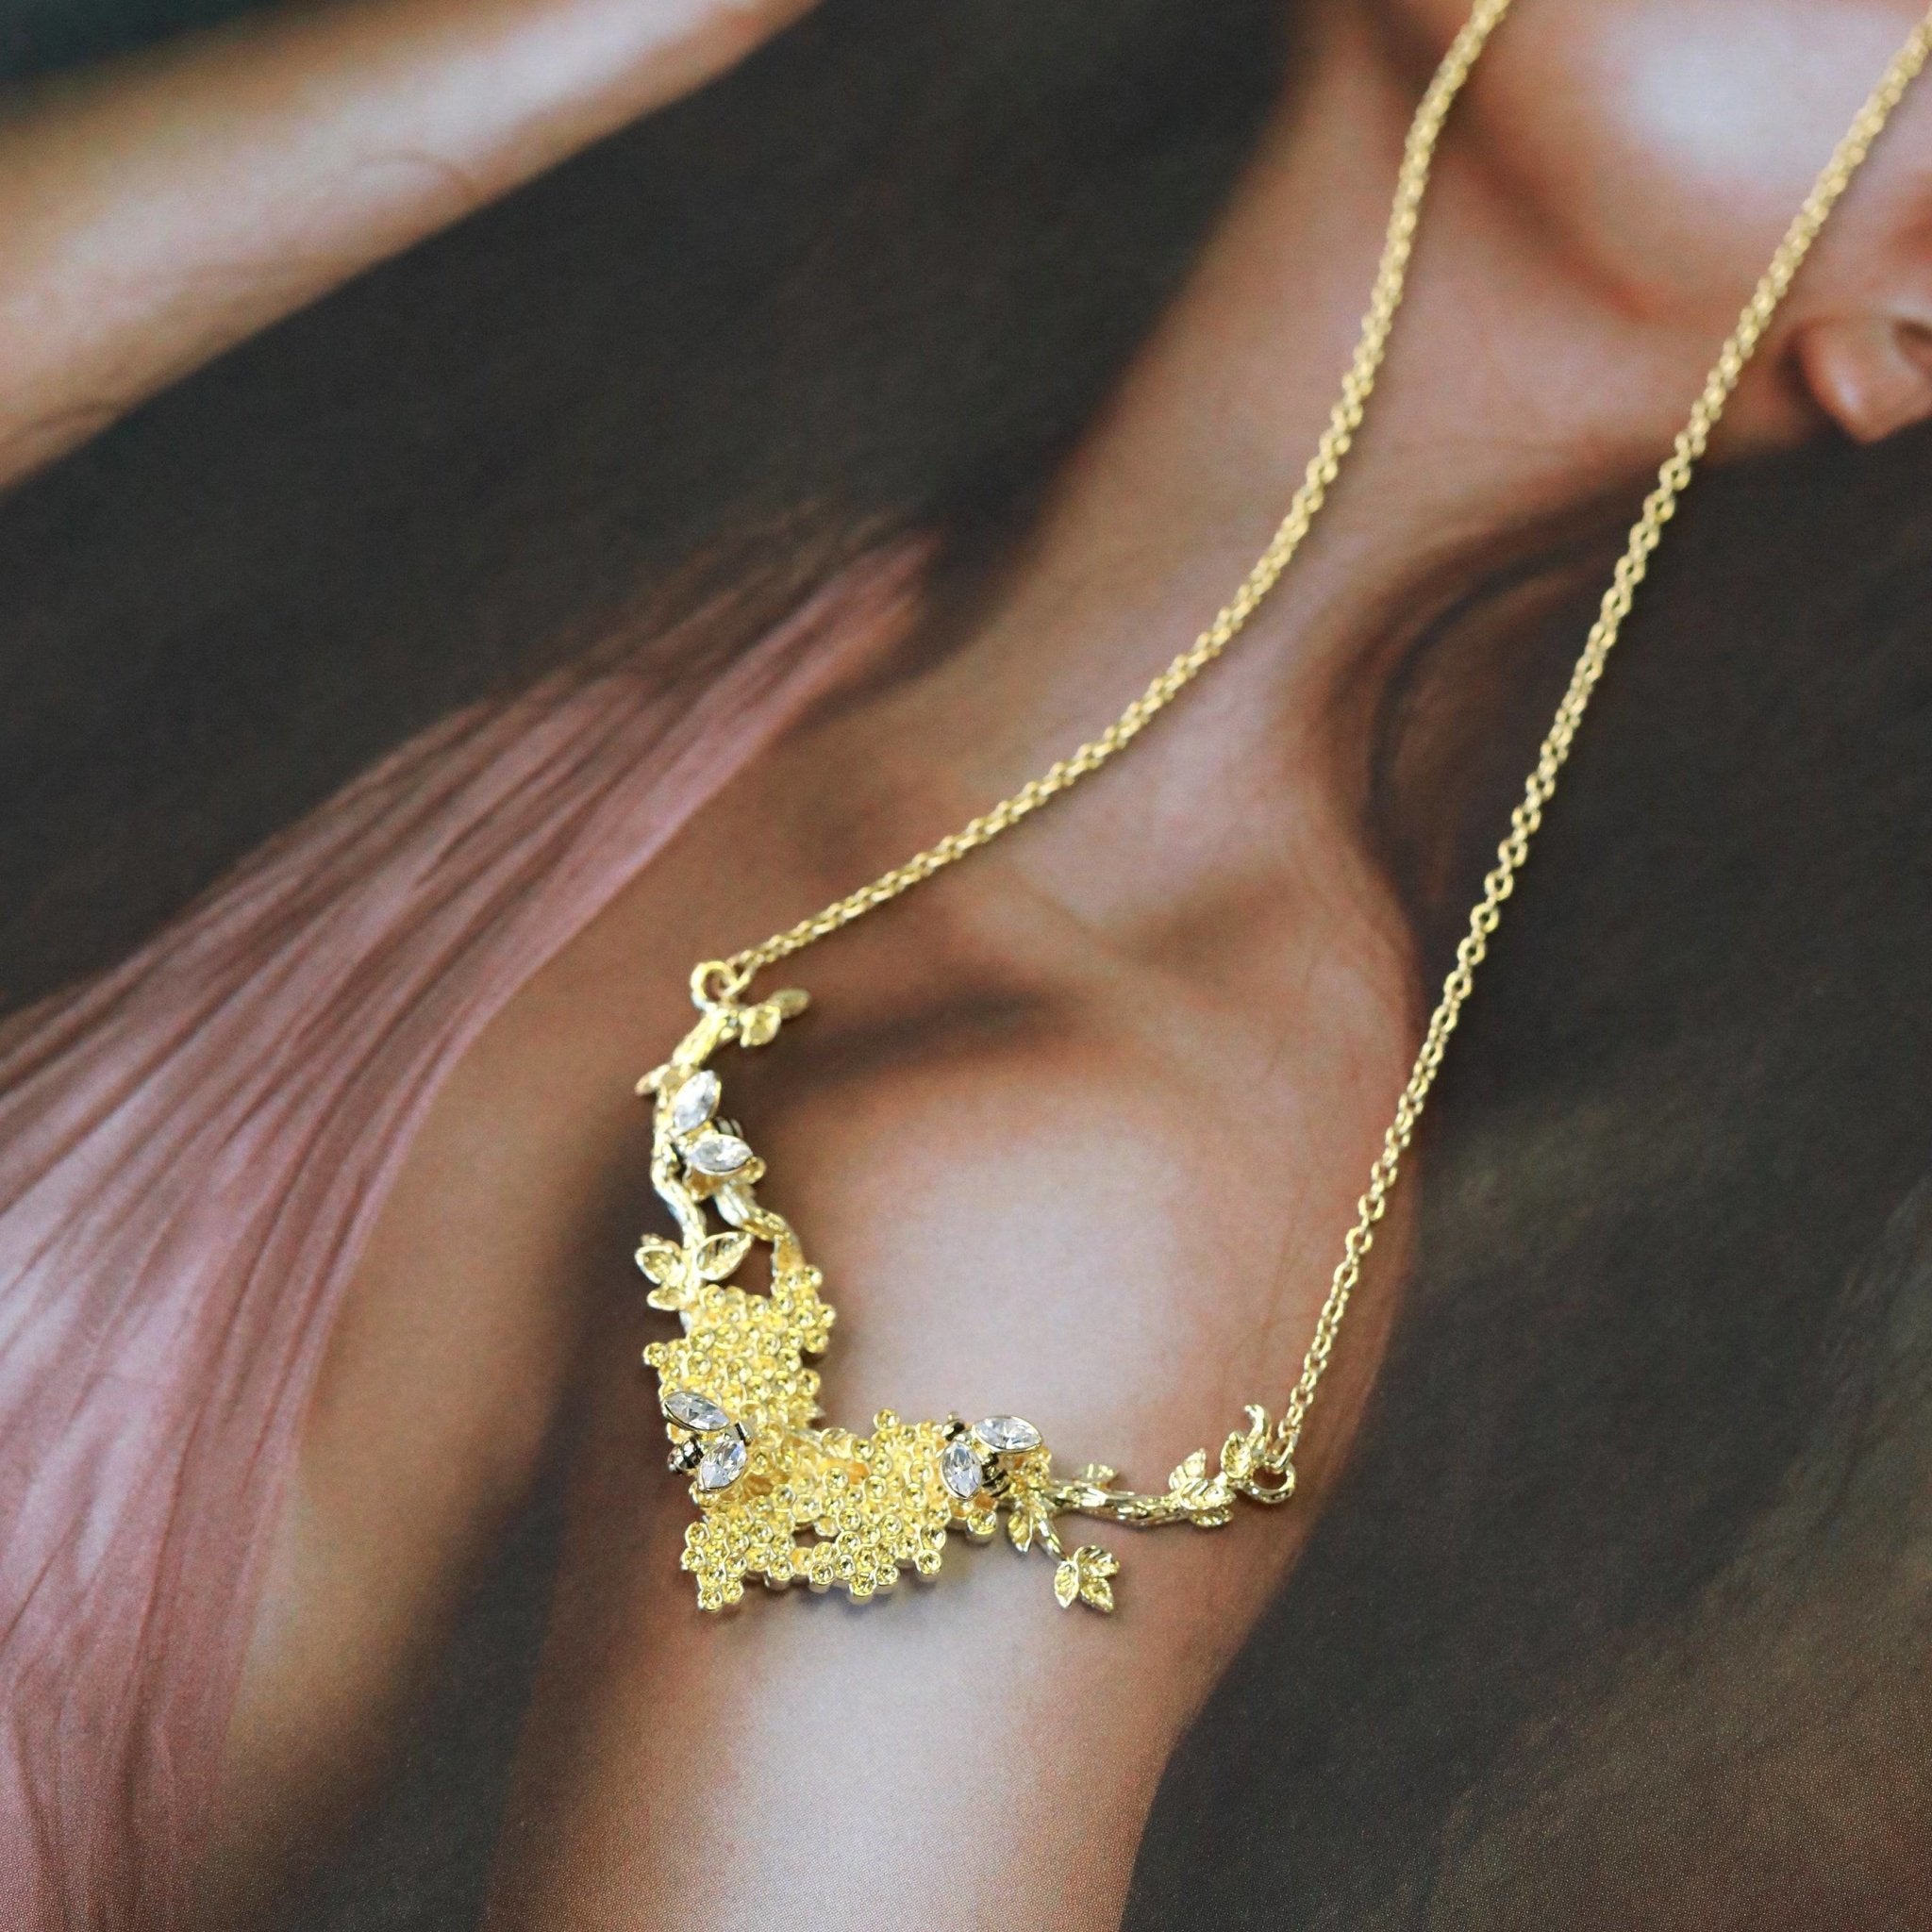 Golden Honeycomb Necklace - The Gilded Witch